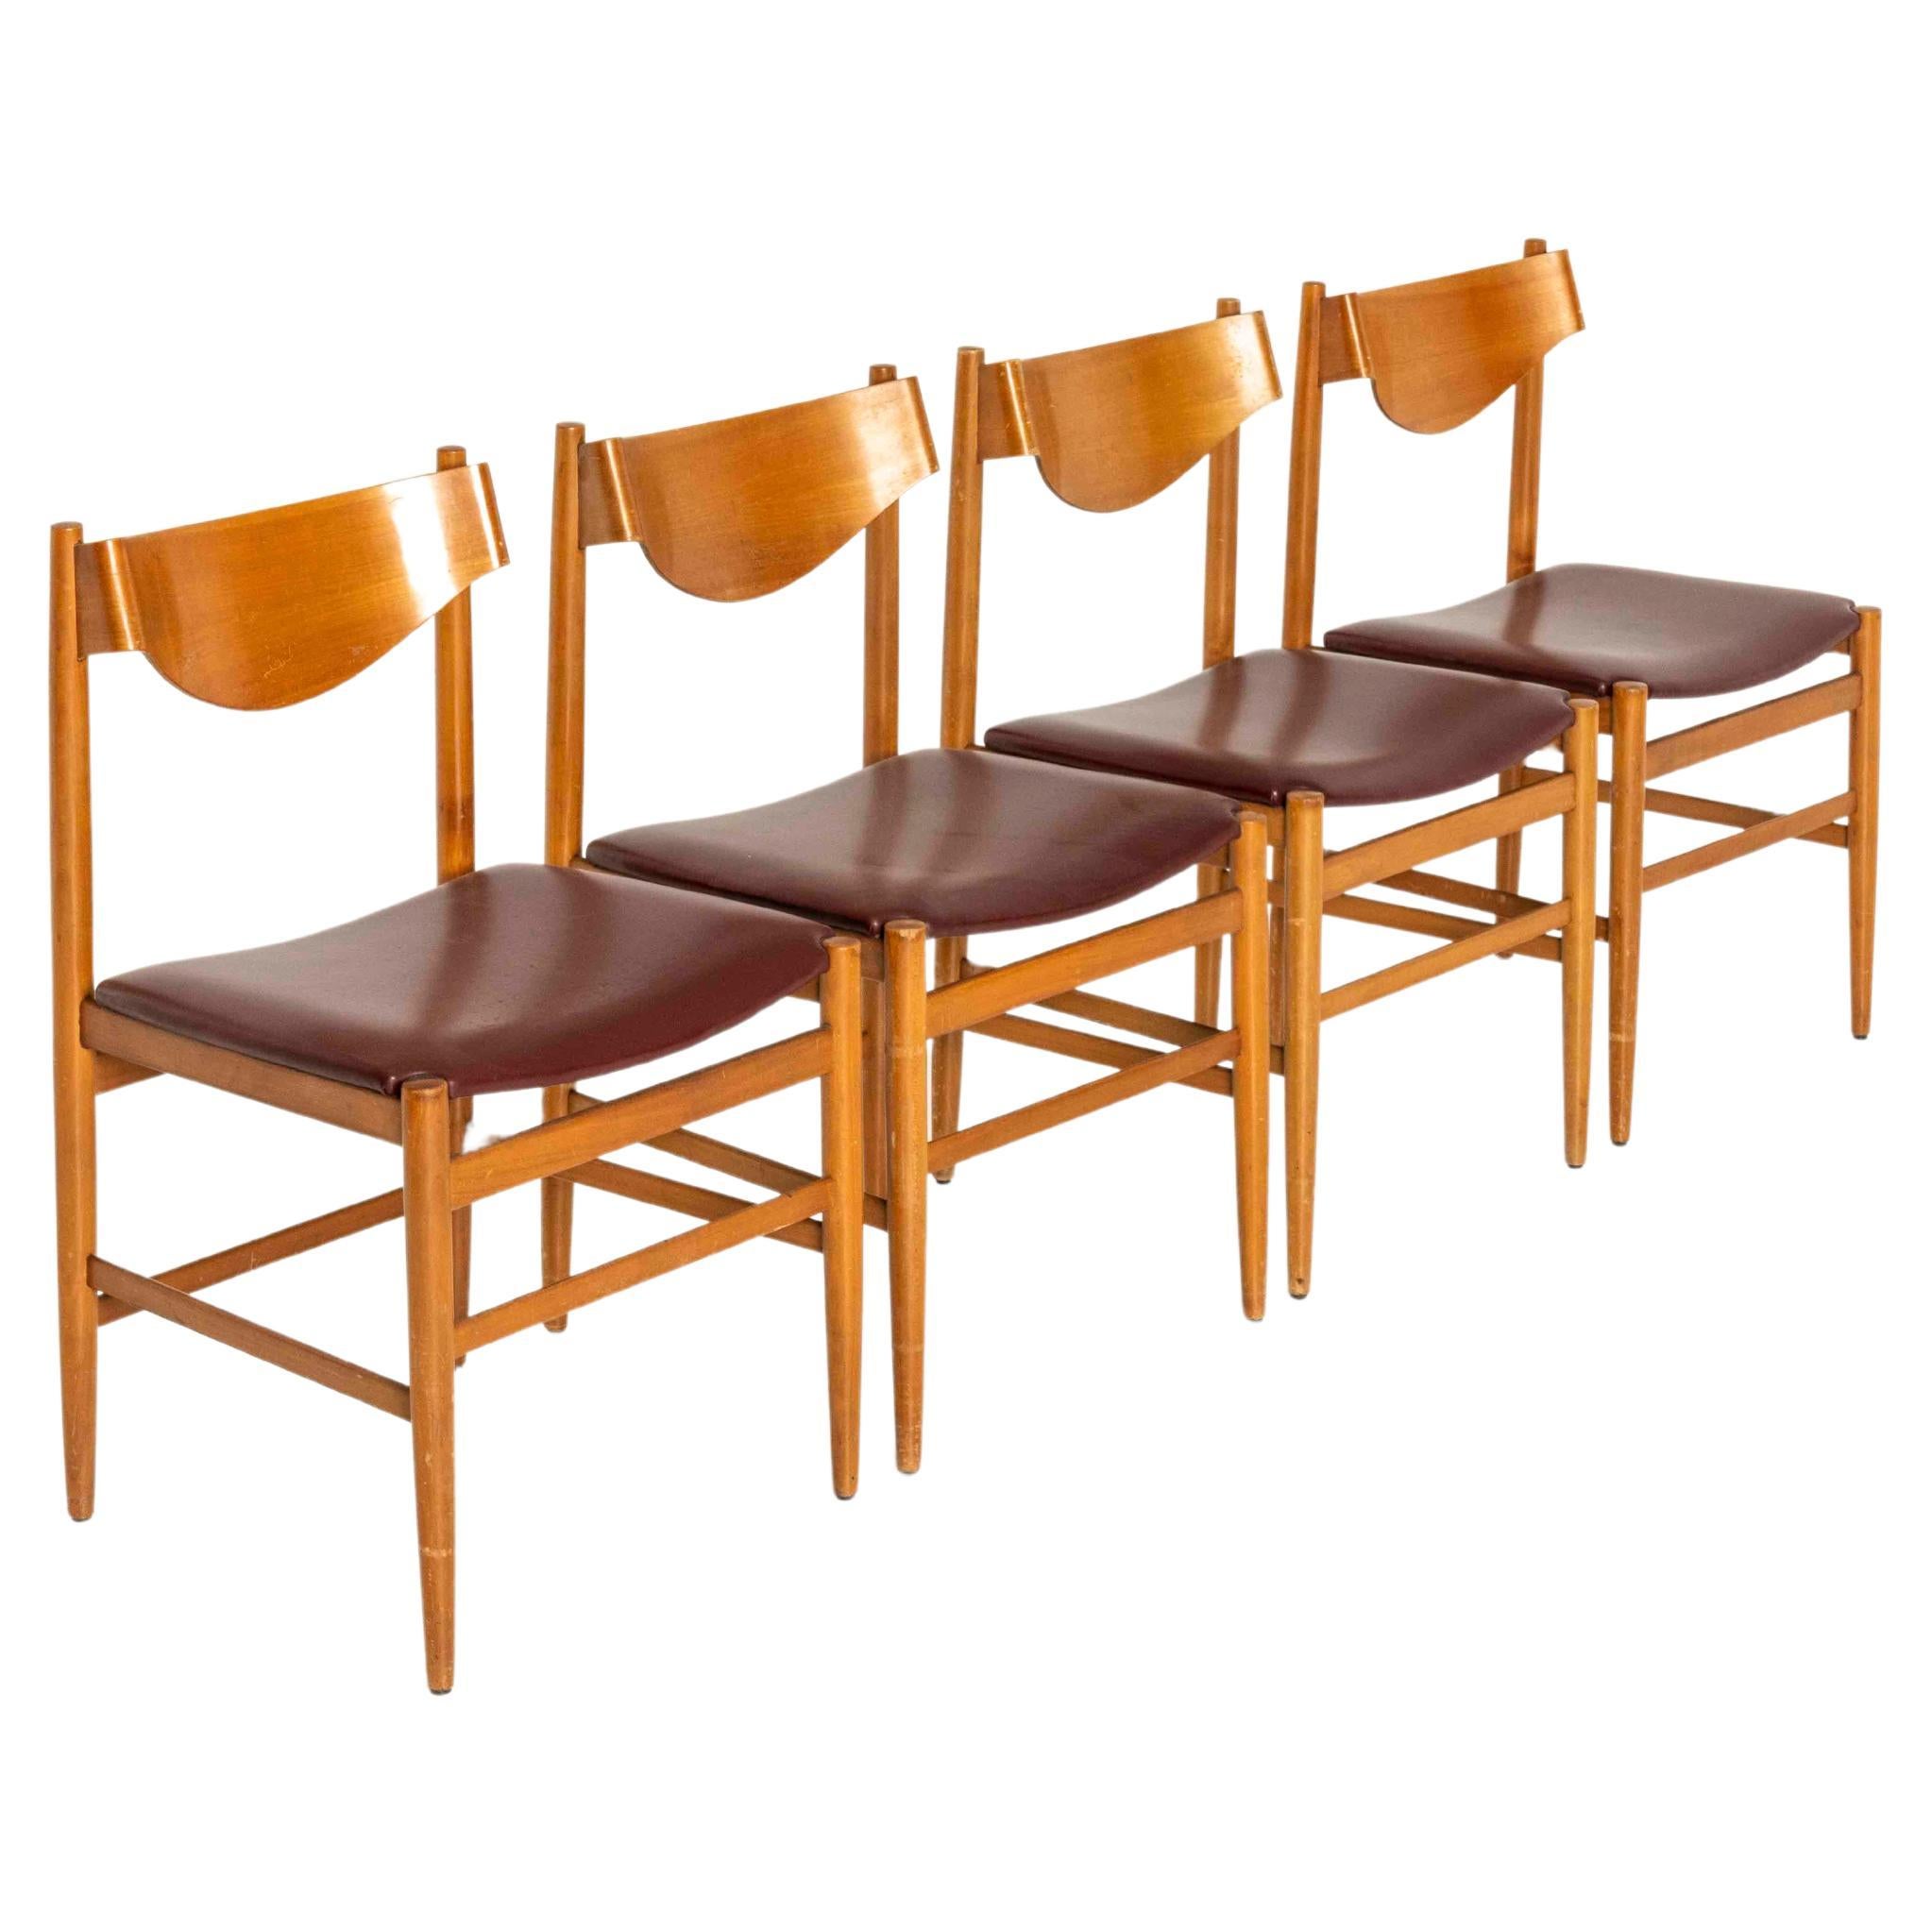 Set of Four Dining Chairs by Gianfranco Frattini for Cassina from the 1960s. The chairs are made of teak with a molded plywood back and red (faux) leather. They have great aesthetics and are in good condition with normal wear and tear due to their